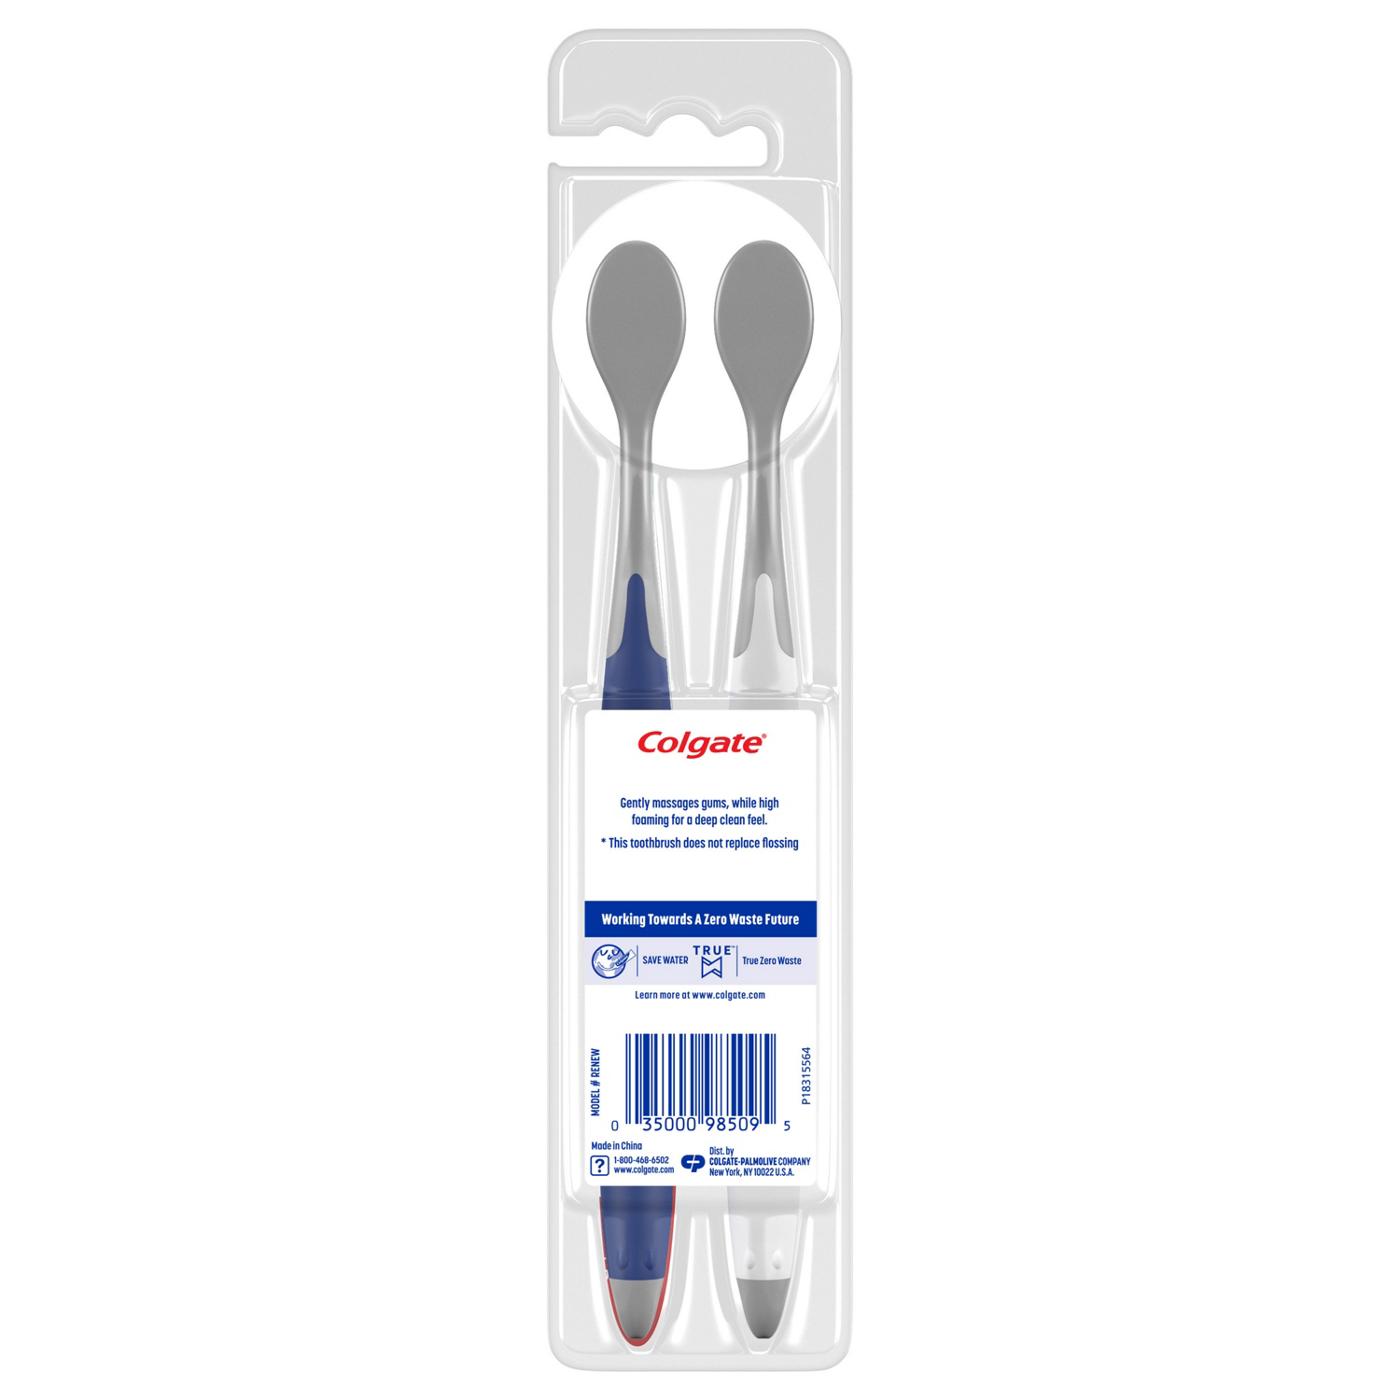 Colgate Renewal Ultra Soft Toothbrushes; image 2 of 3